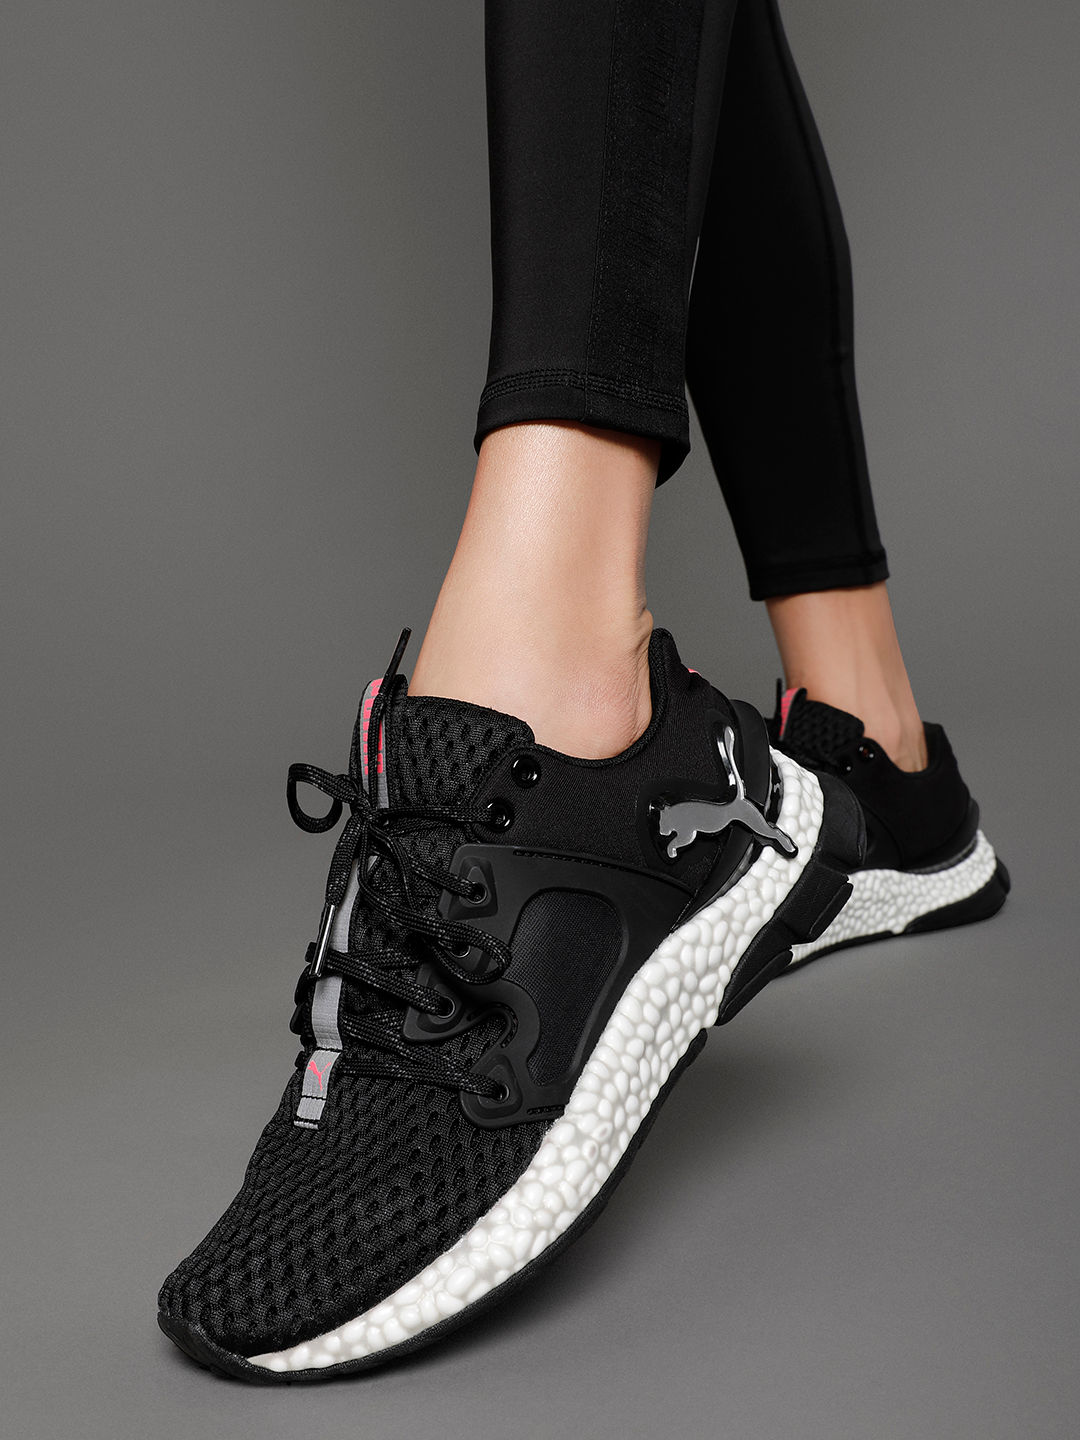 Puma HYBRID Sky Women's Running Shoes - Black (4): Buy Puma HYBRID Sky Women's  Running Shoes - Black (4) Online at Best Price in India | Nykaa